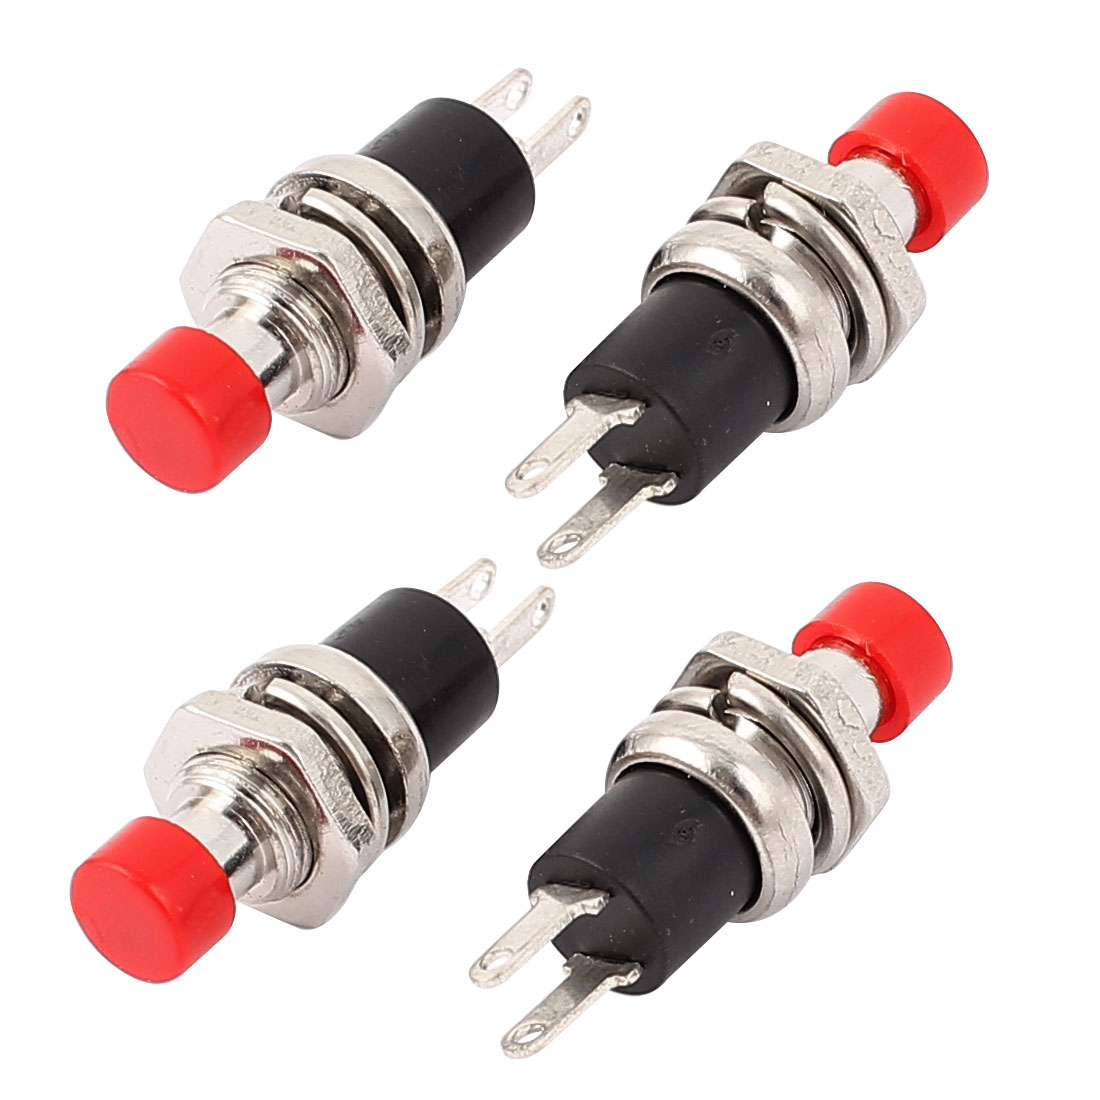 Unique Bargains 4pcs SPST Momentary OFF-ON Push Button Switch 10mm Red